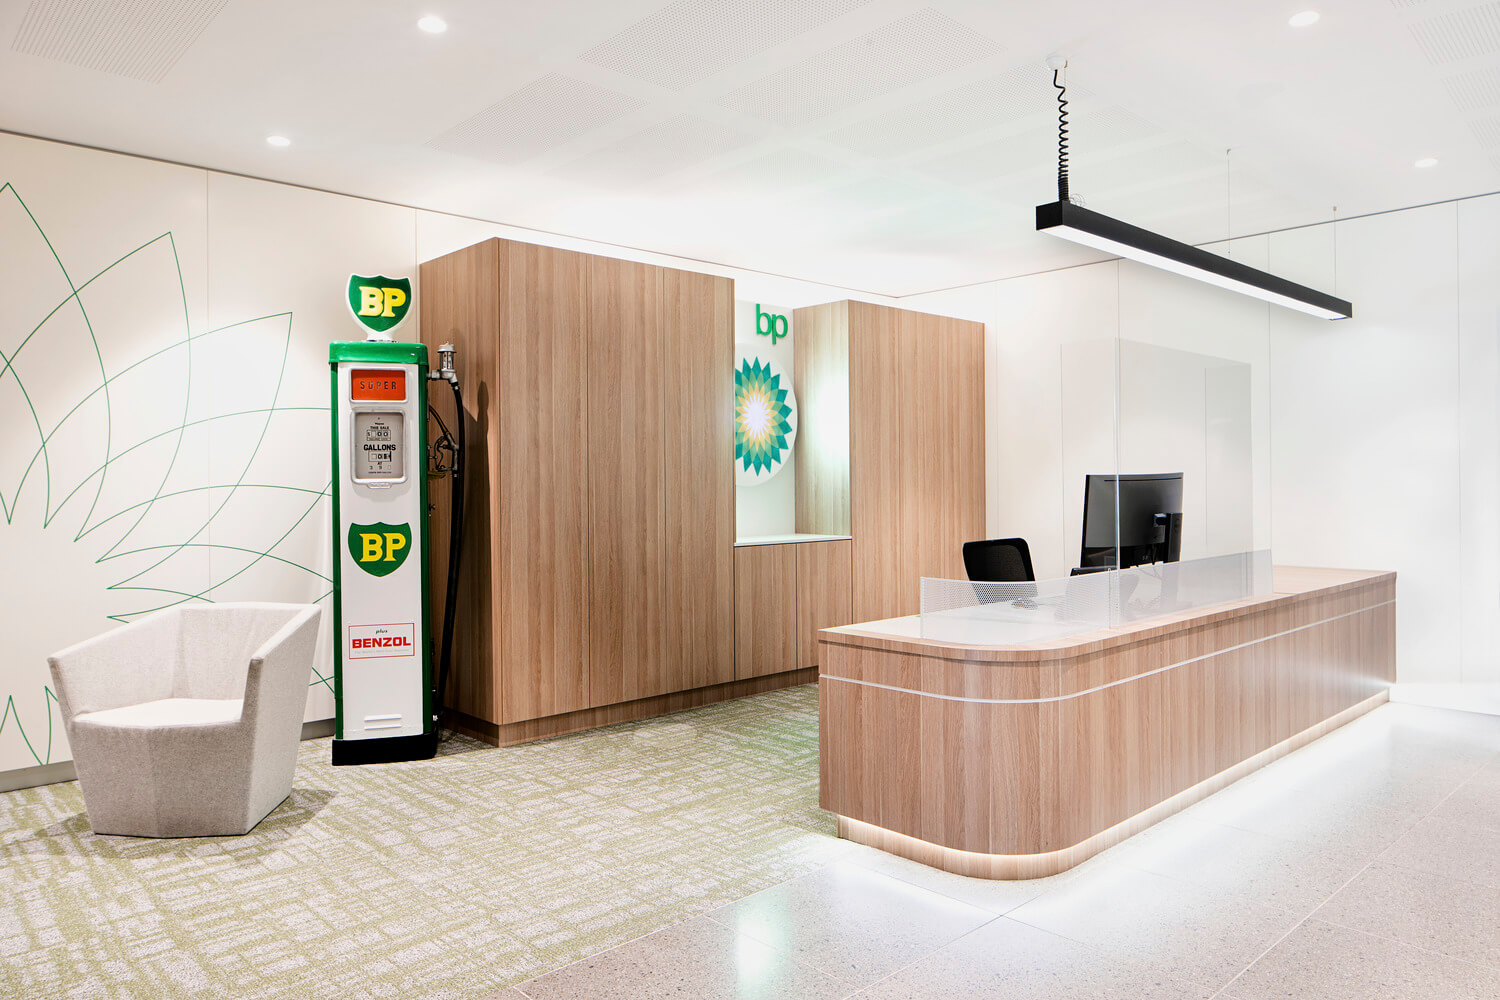 BP reception area with logo and petrol pump